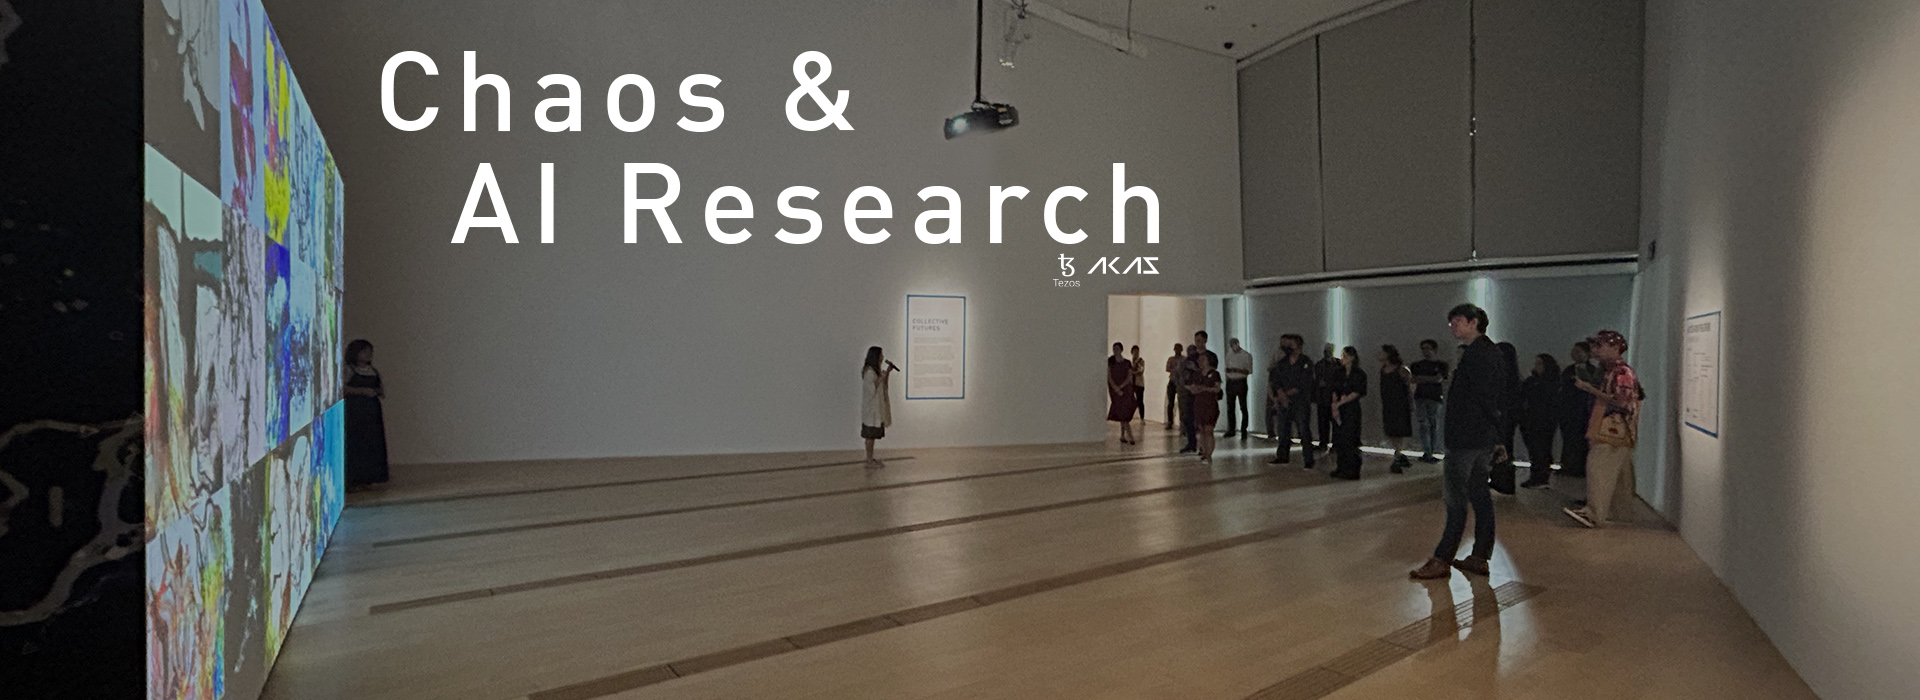 ‘Chaos & AI Research’ at the ArtScience Museum exhibition